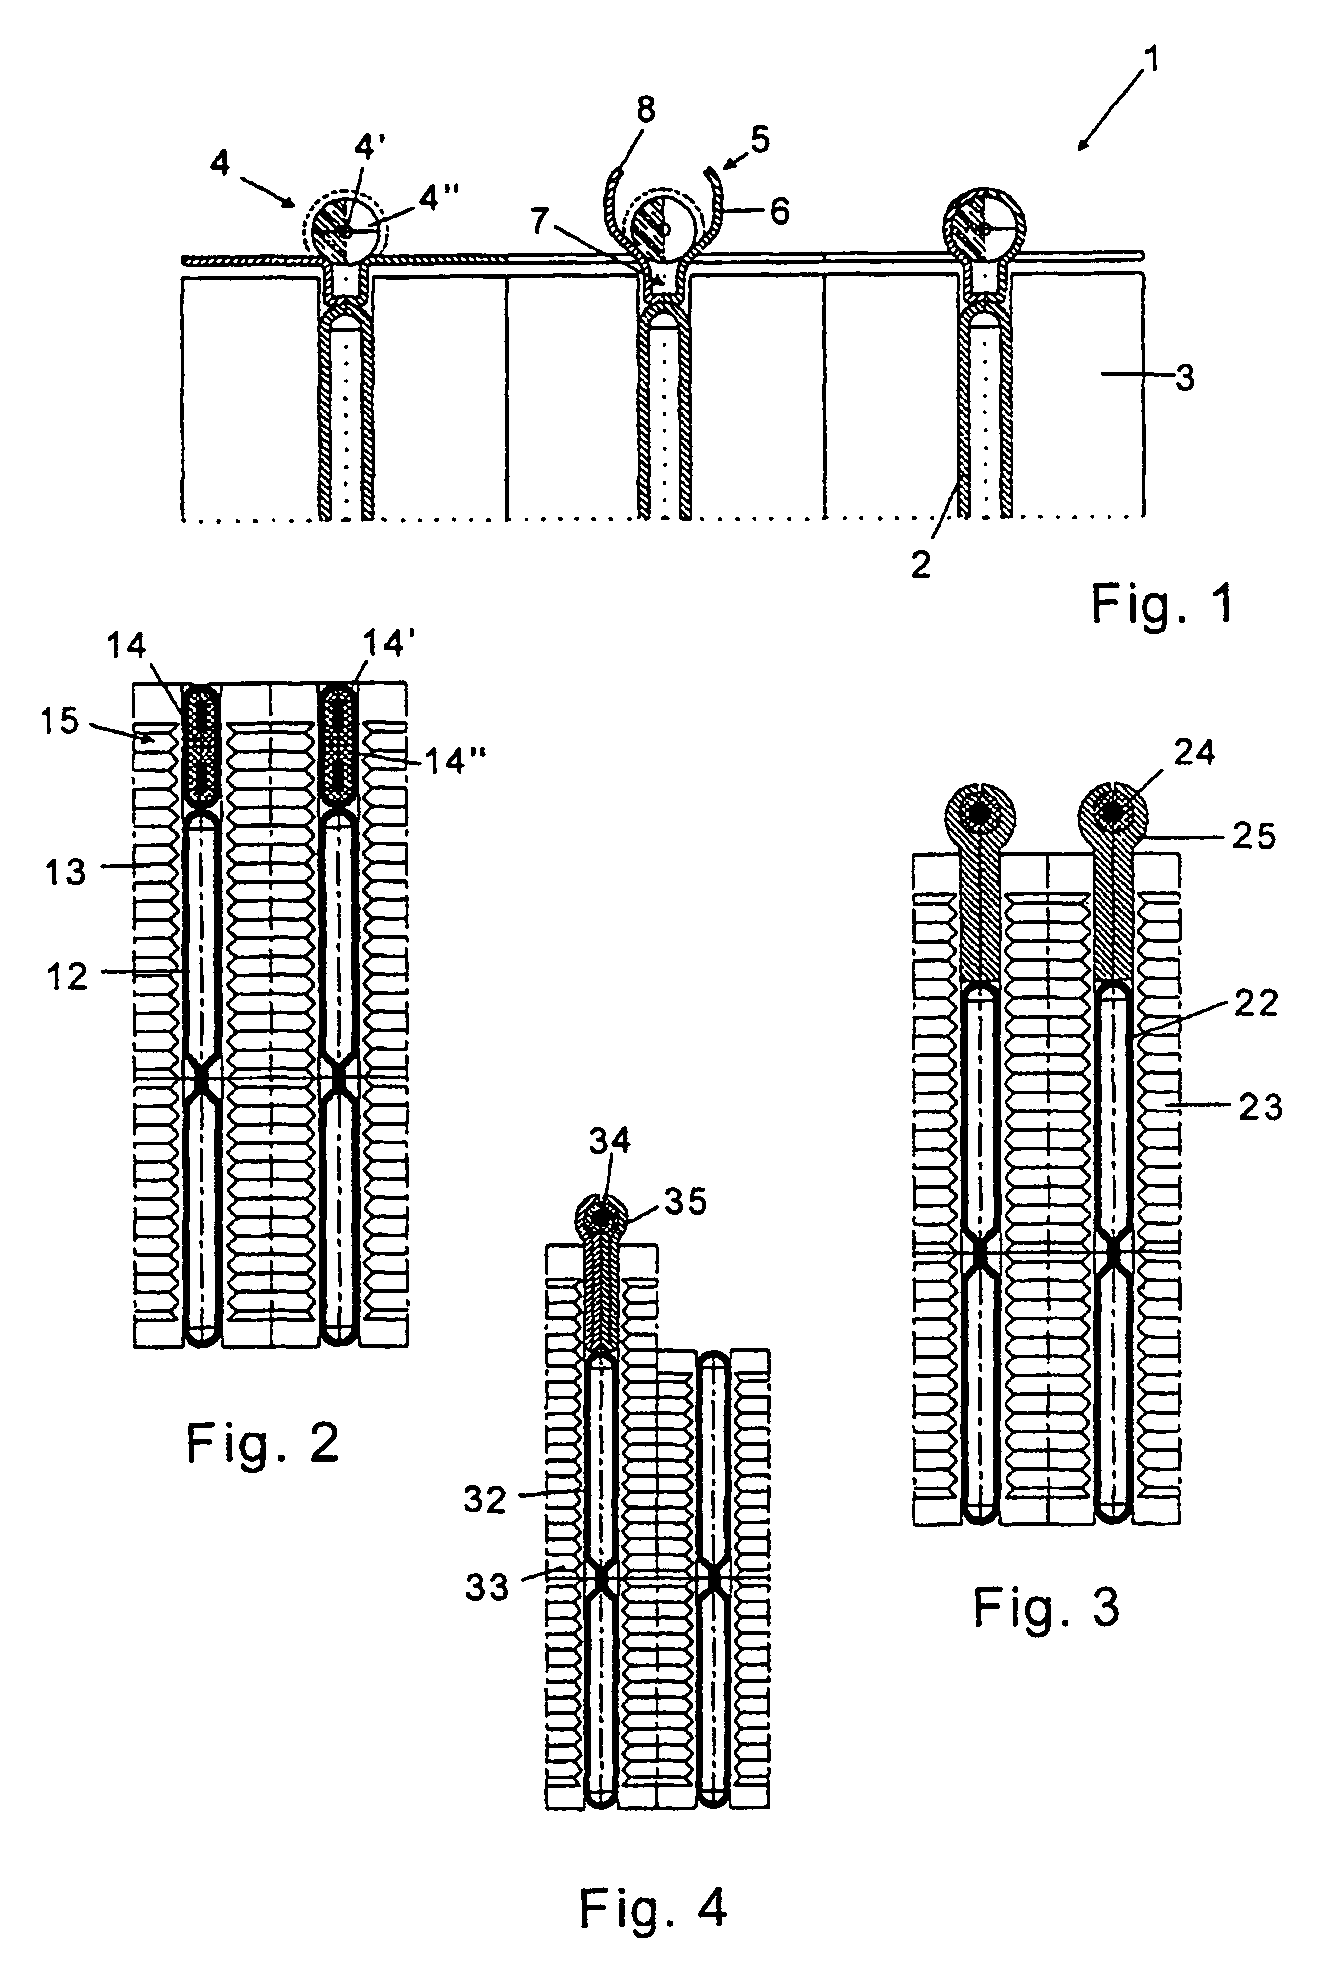 Heat exchanger, particularly for a heating or air conditioning unit in a motor vehicle